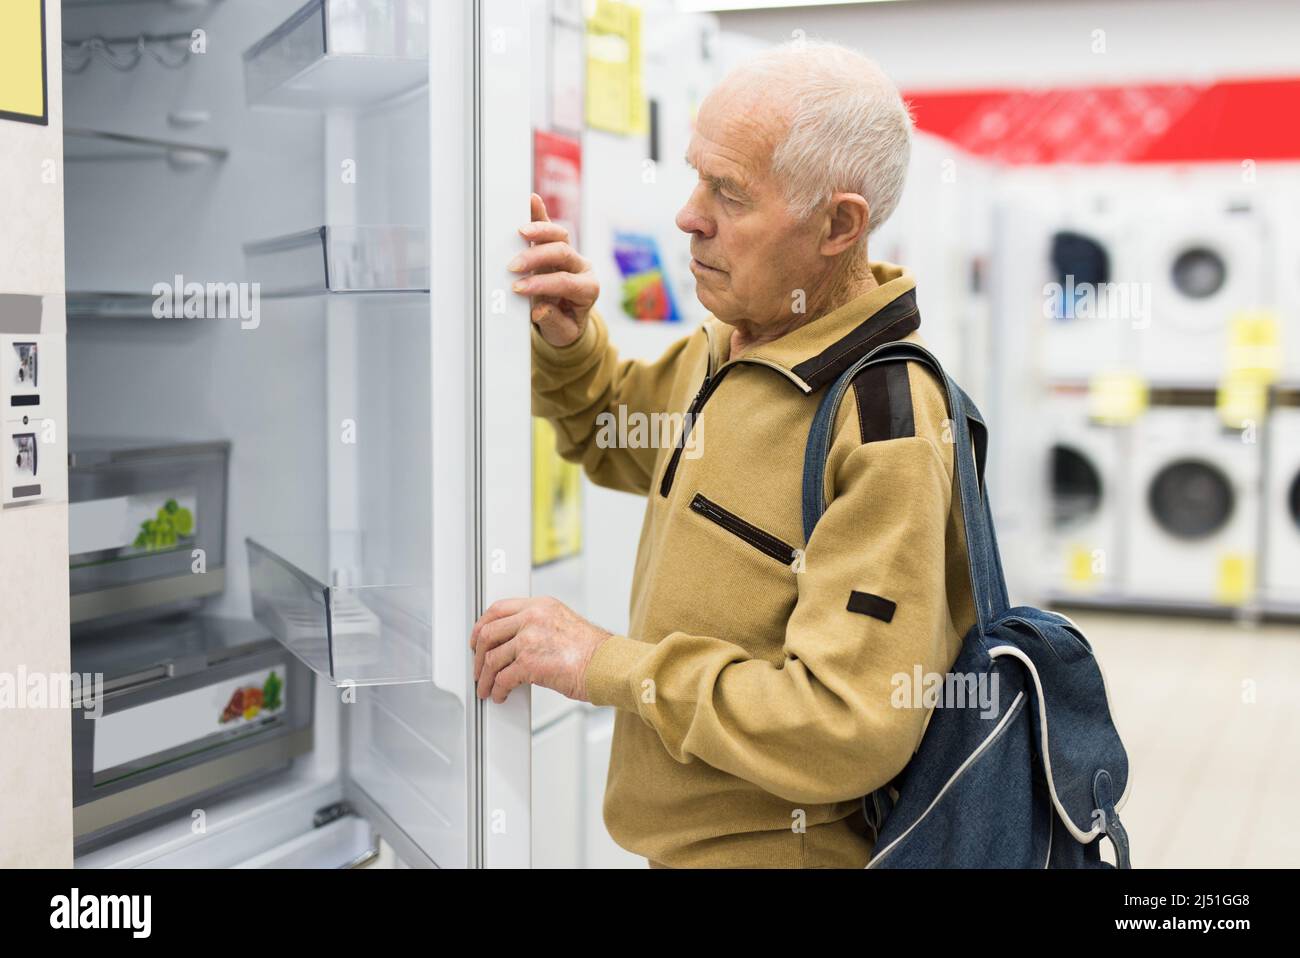 elderly grayhaired man pensioner looking refrigerator at counter in showroom of electrical appliance hypermarket department Stock Photo